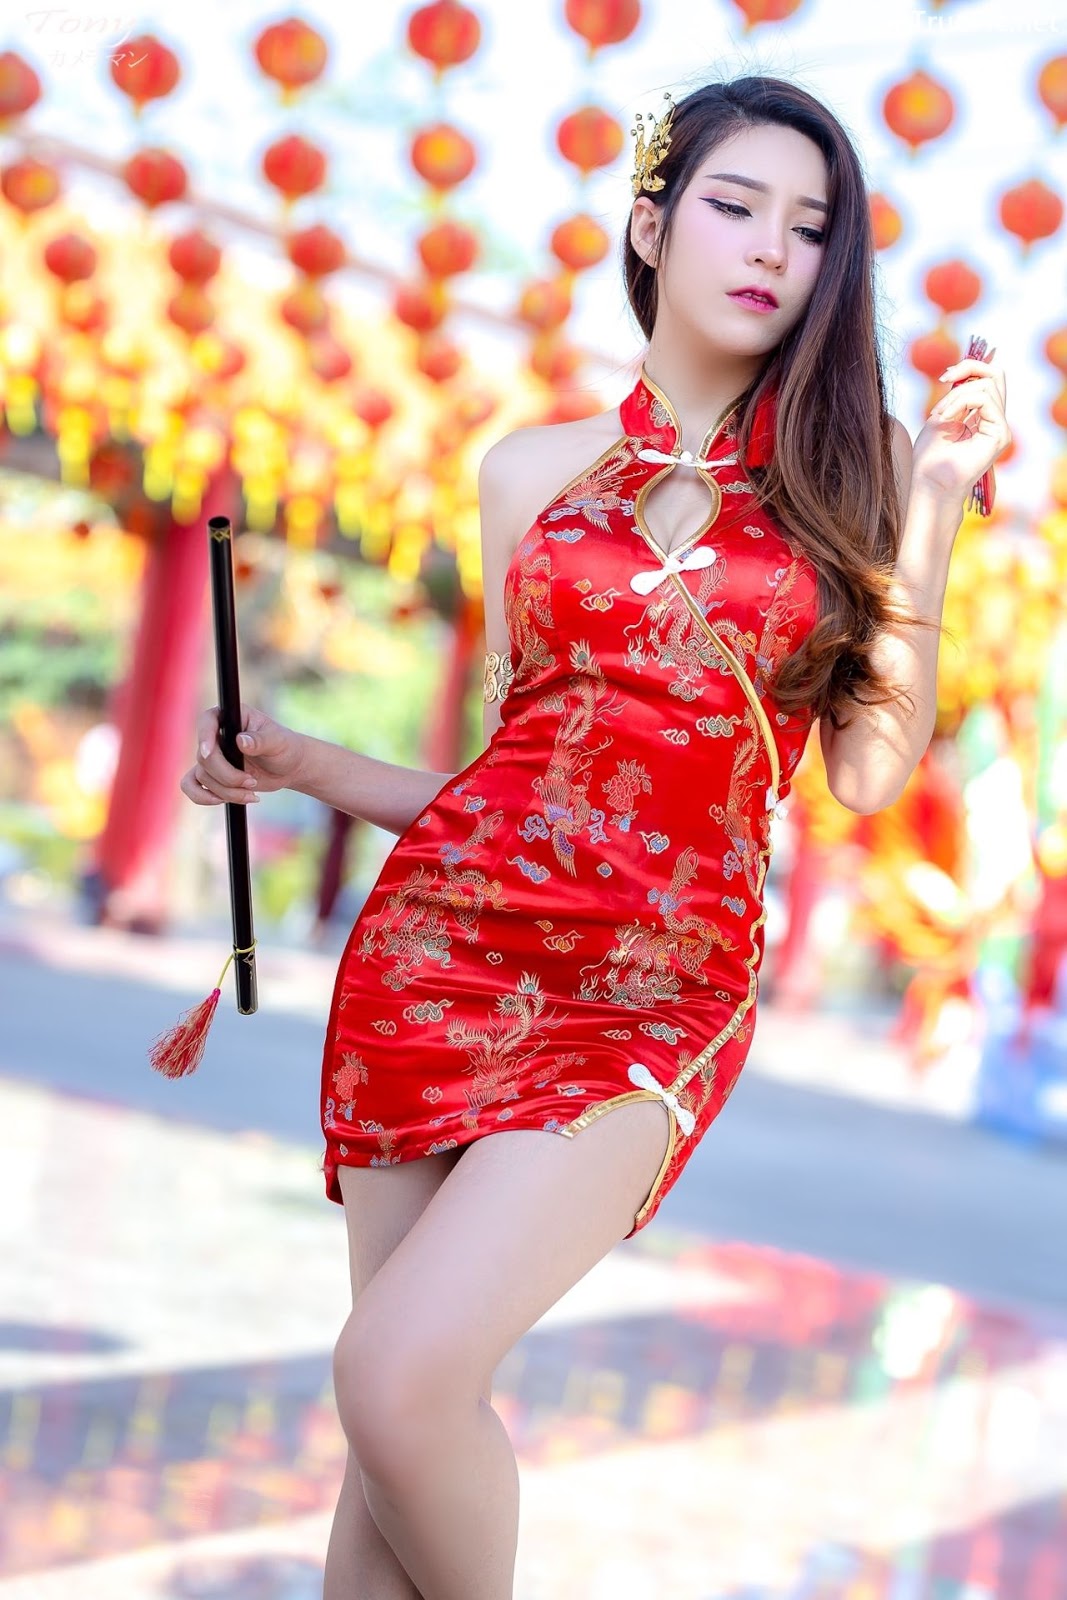 Rich chinese model